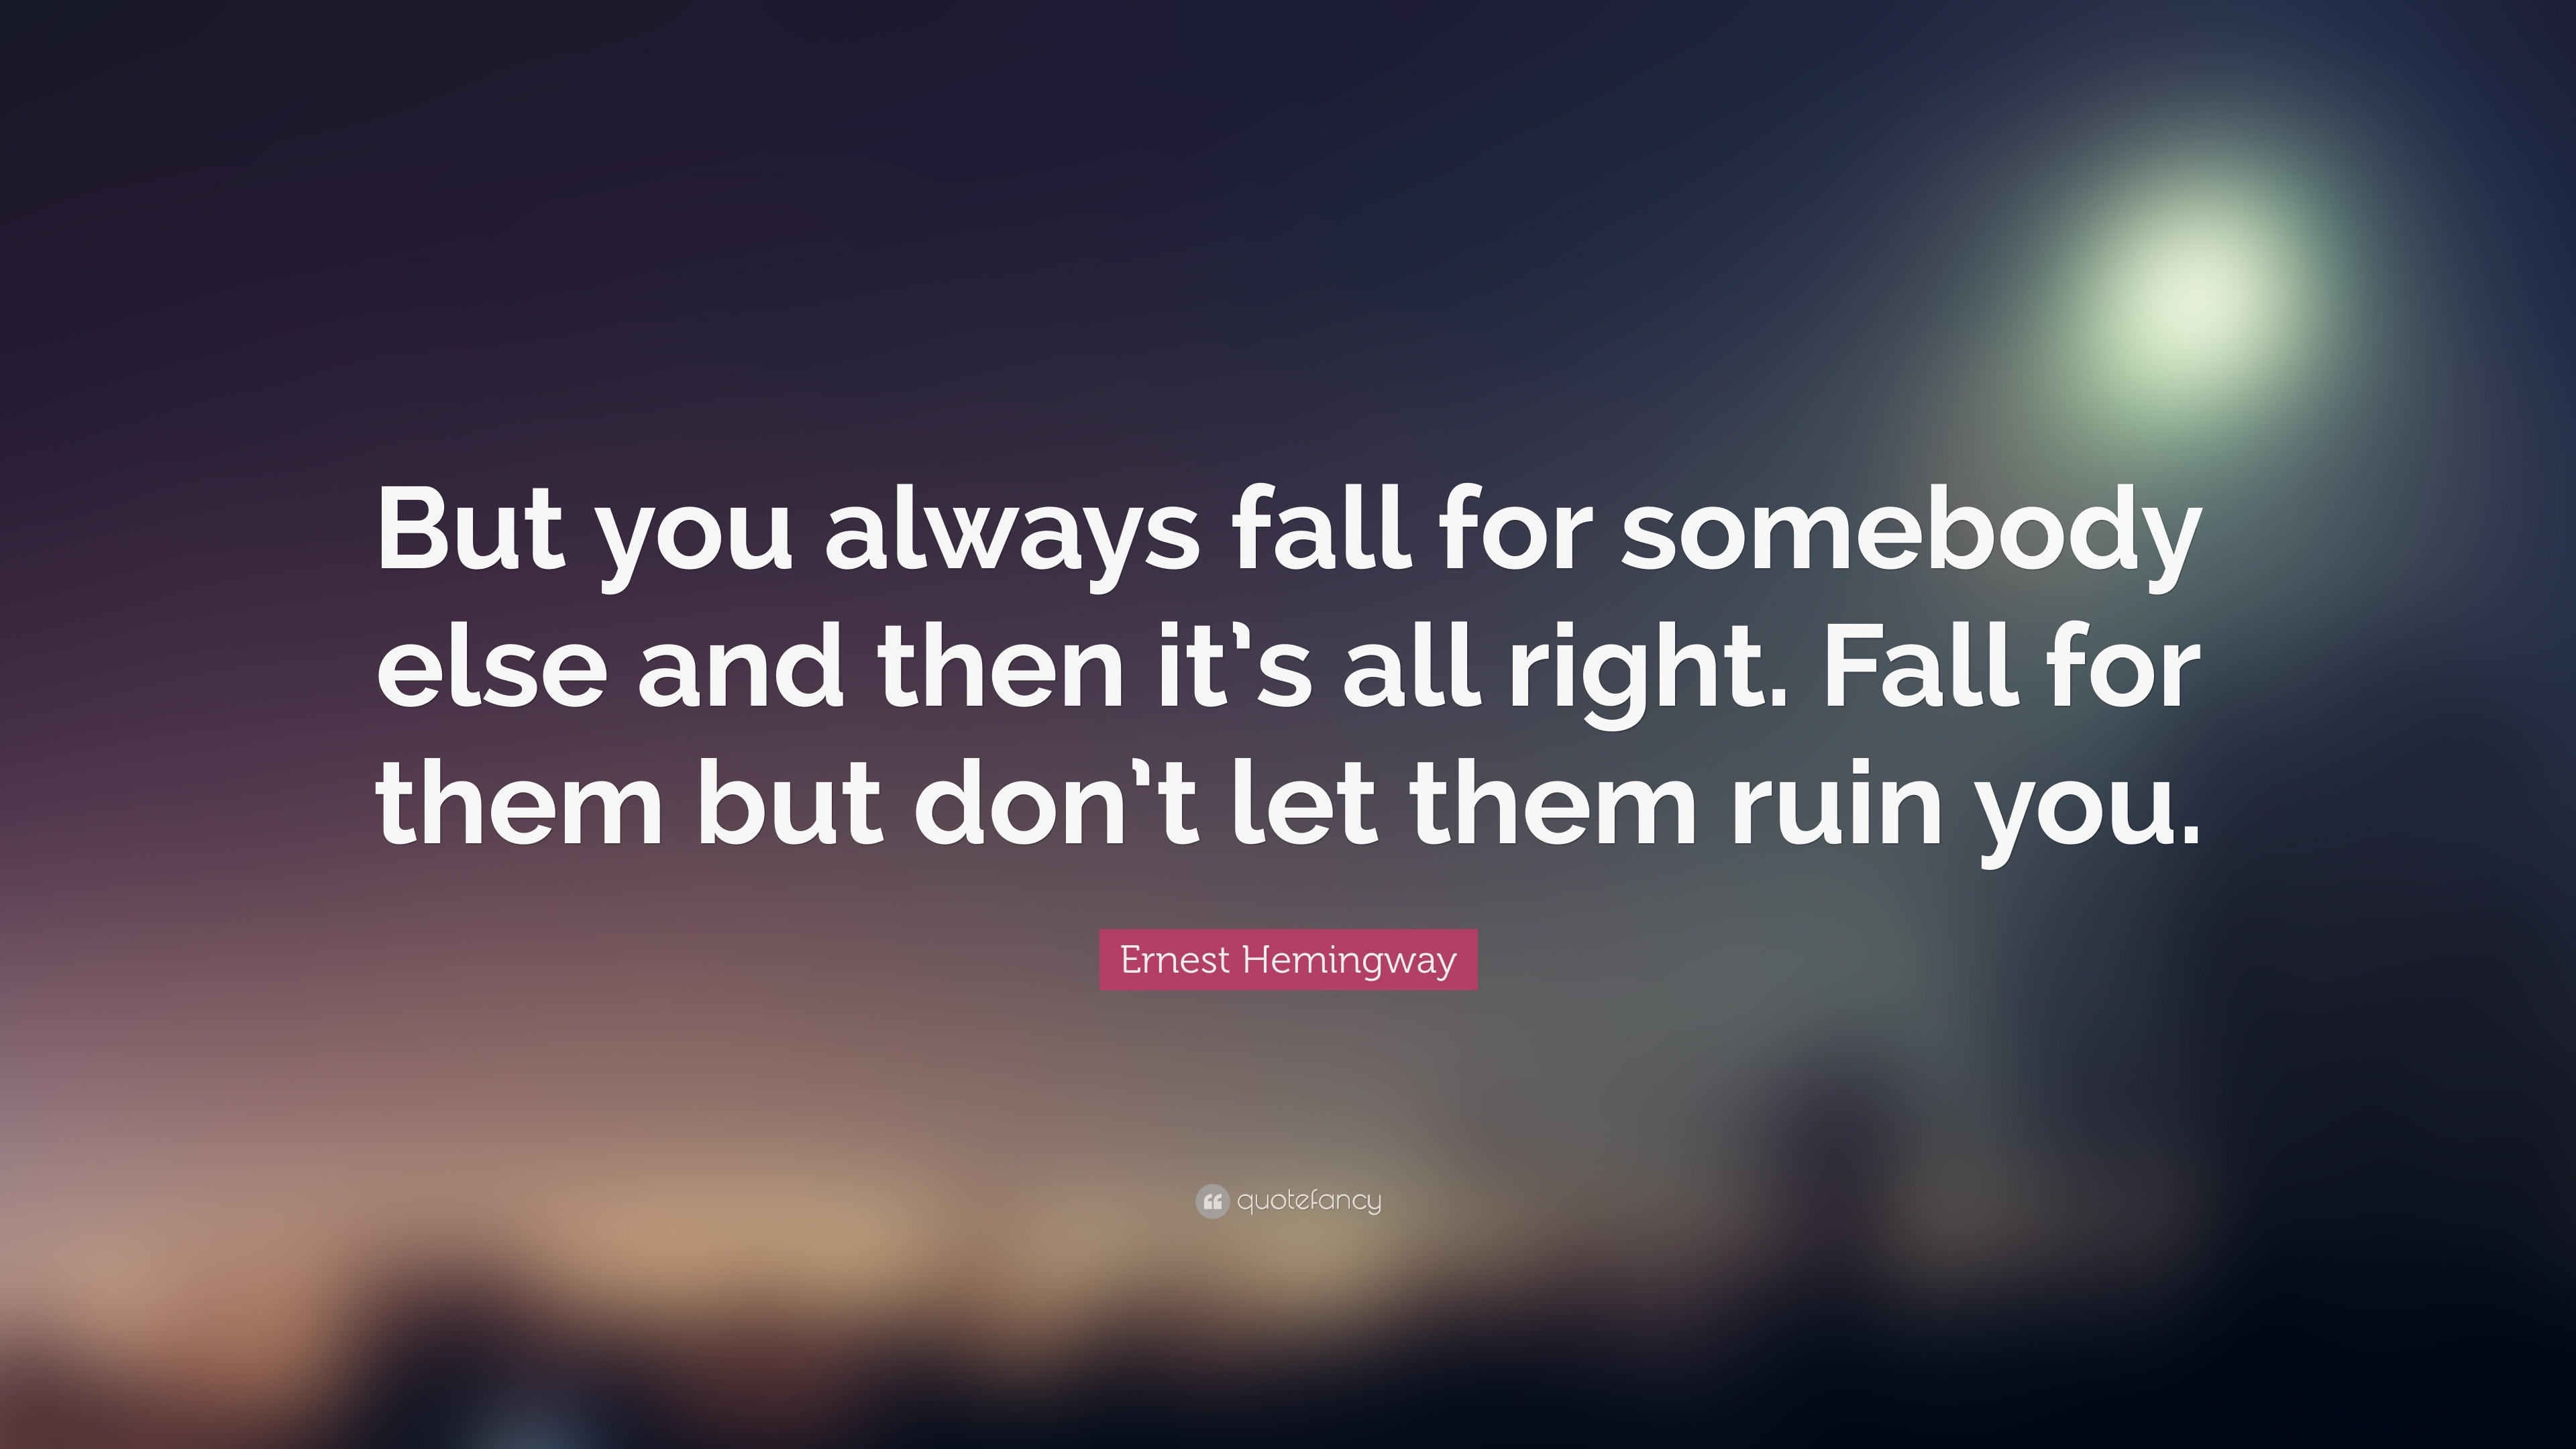 Ernest Hemingway Quote: “But you always fall for somebody else and then ...